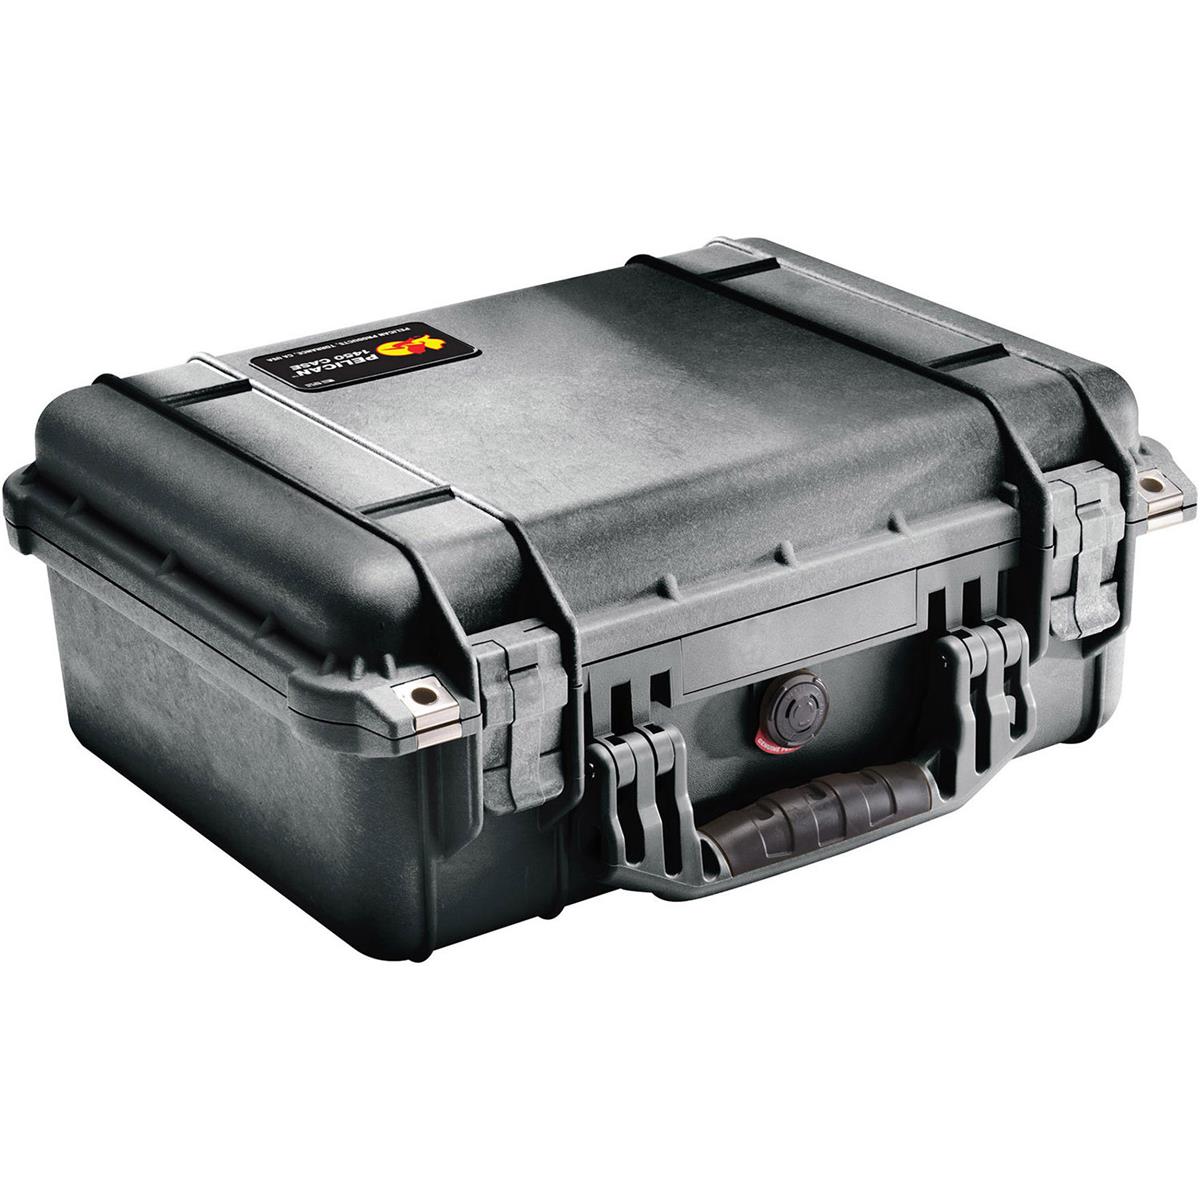 Photos - Camera Bag Pelican 1450 Watertight Hard Case with Padded Dividers - Black 1450-004-11 